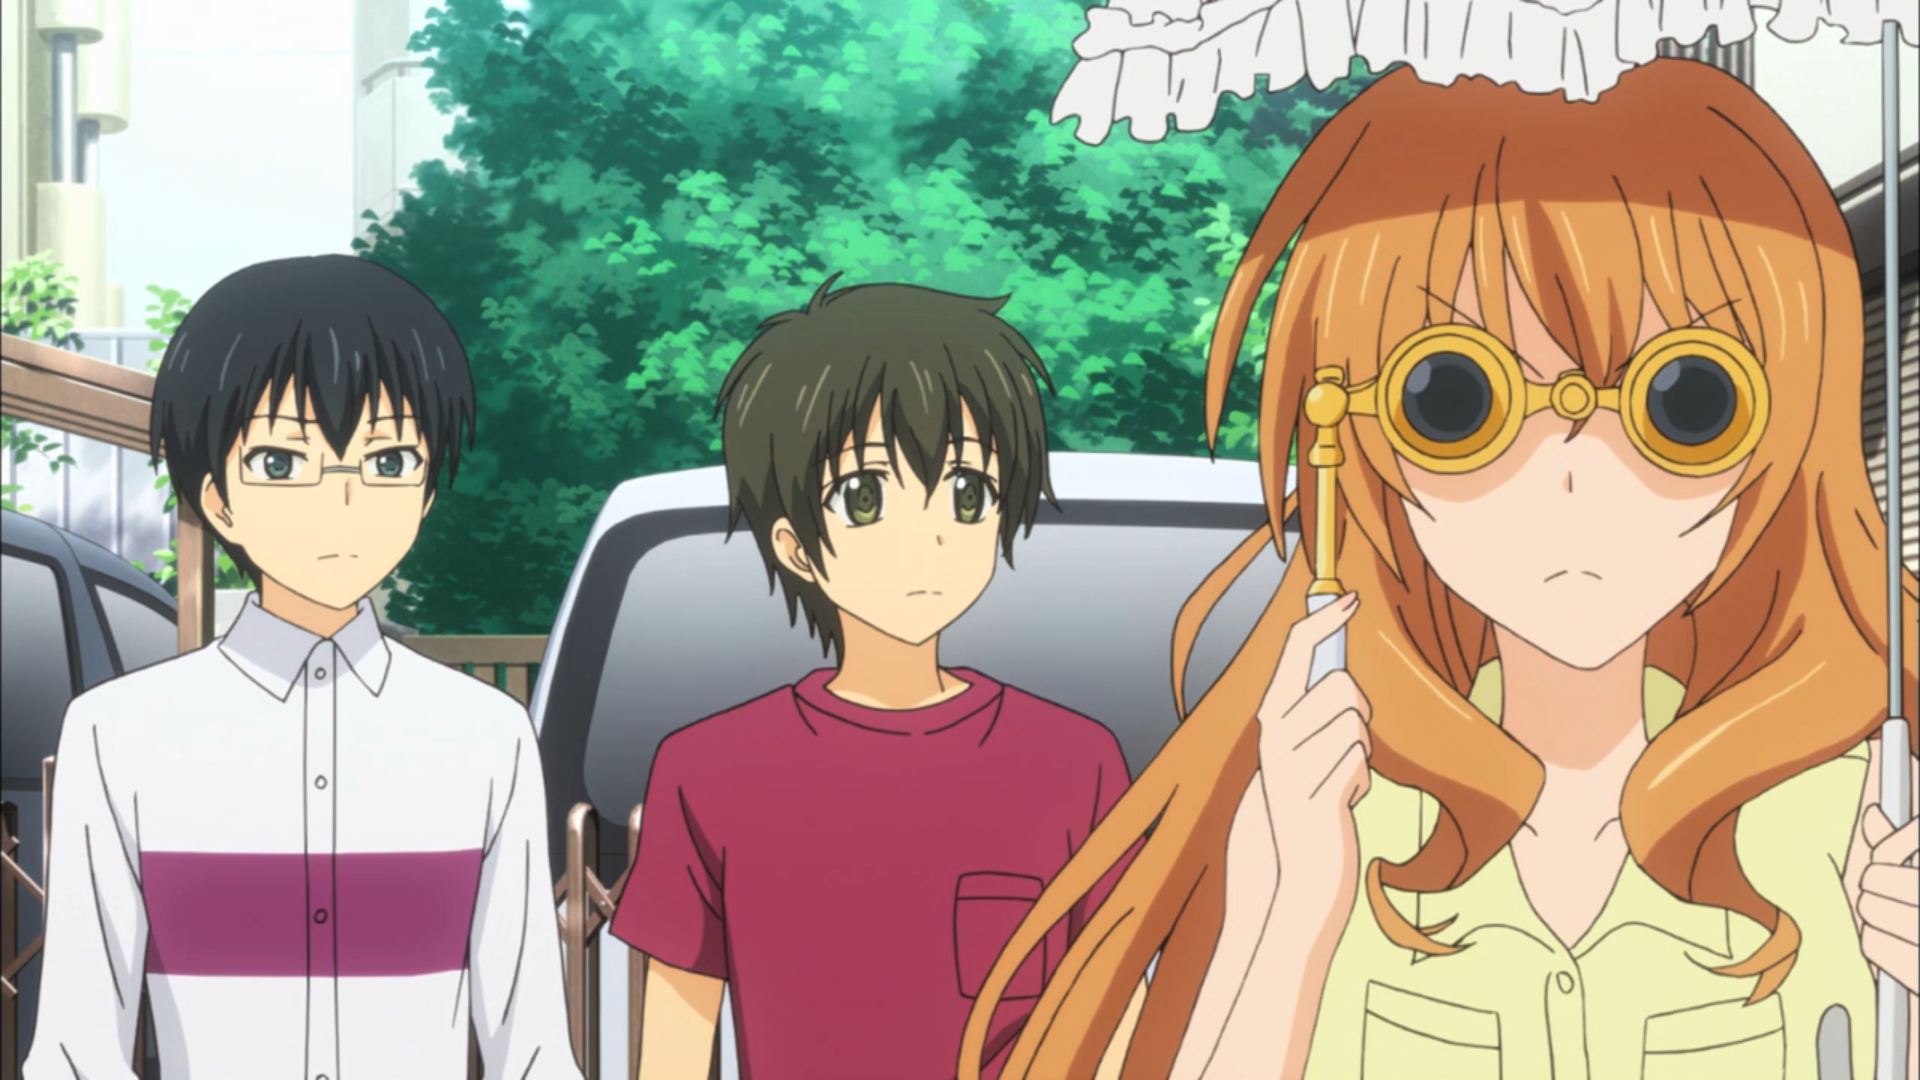 Characters appearing in Golden Time Anime